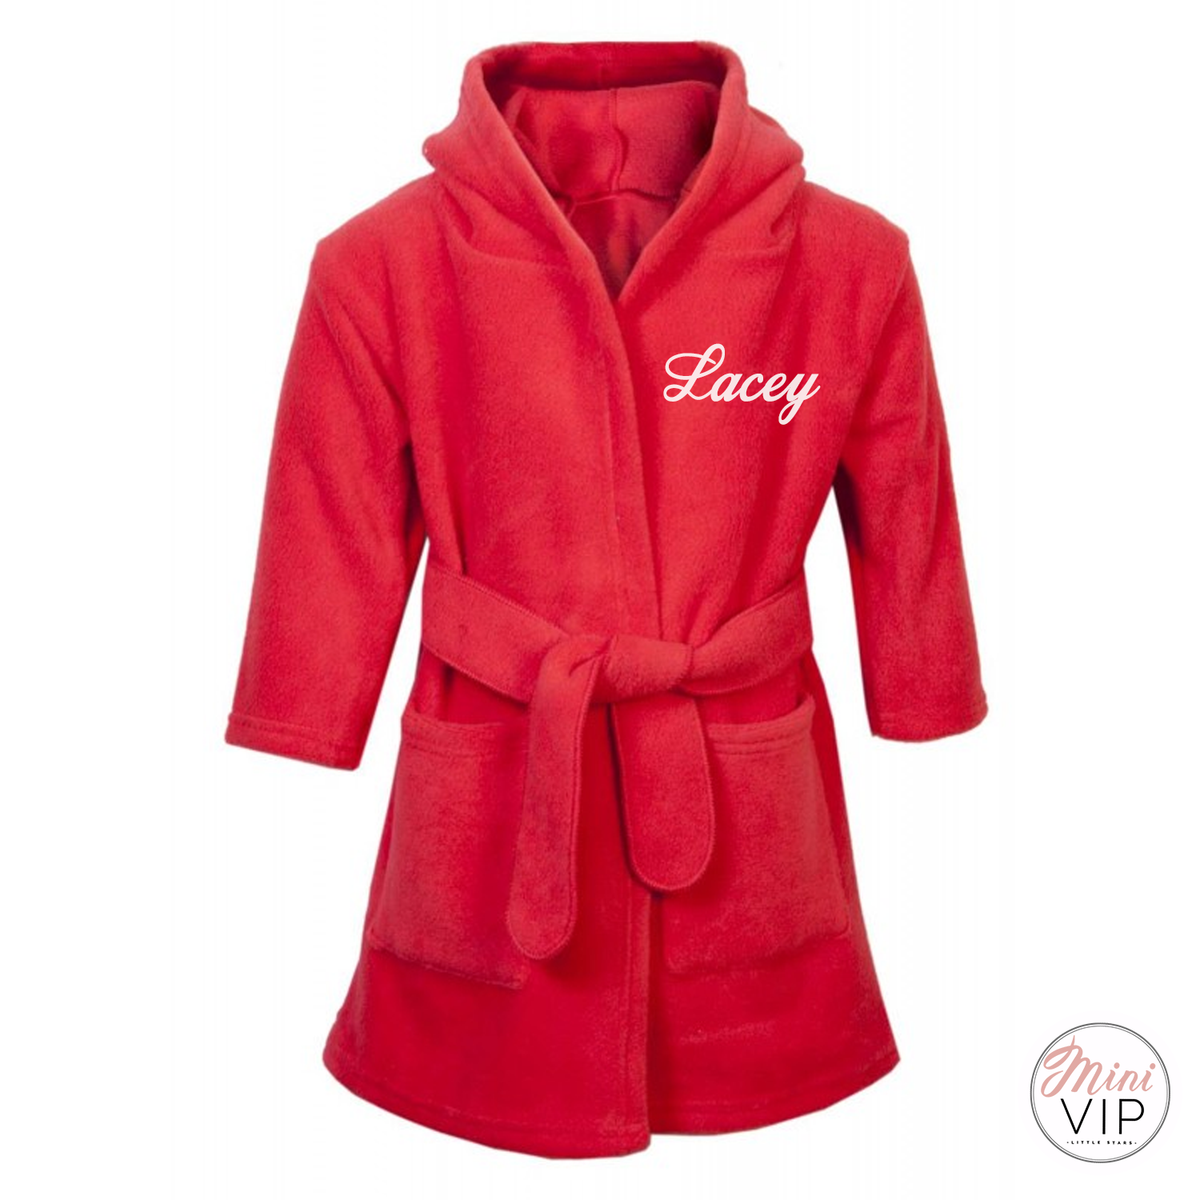 Red Personalised Fluffy Dressing Gown 6 months - 6 years